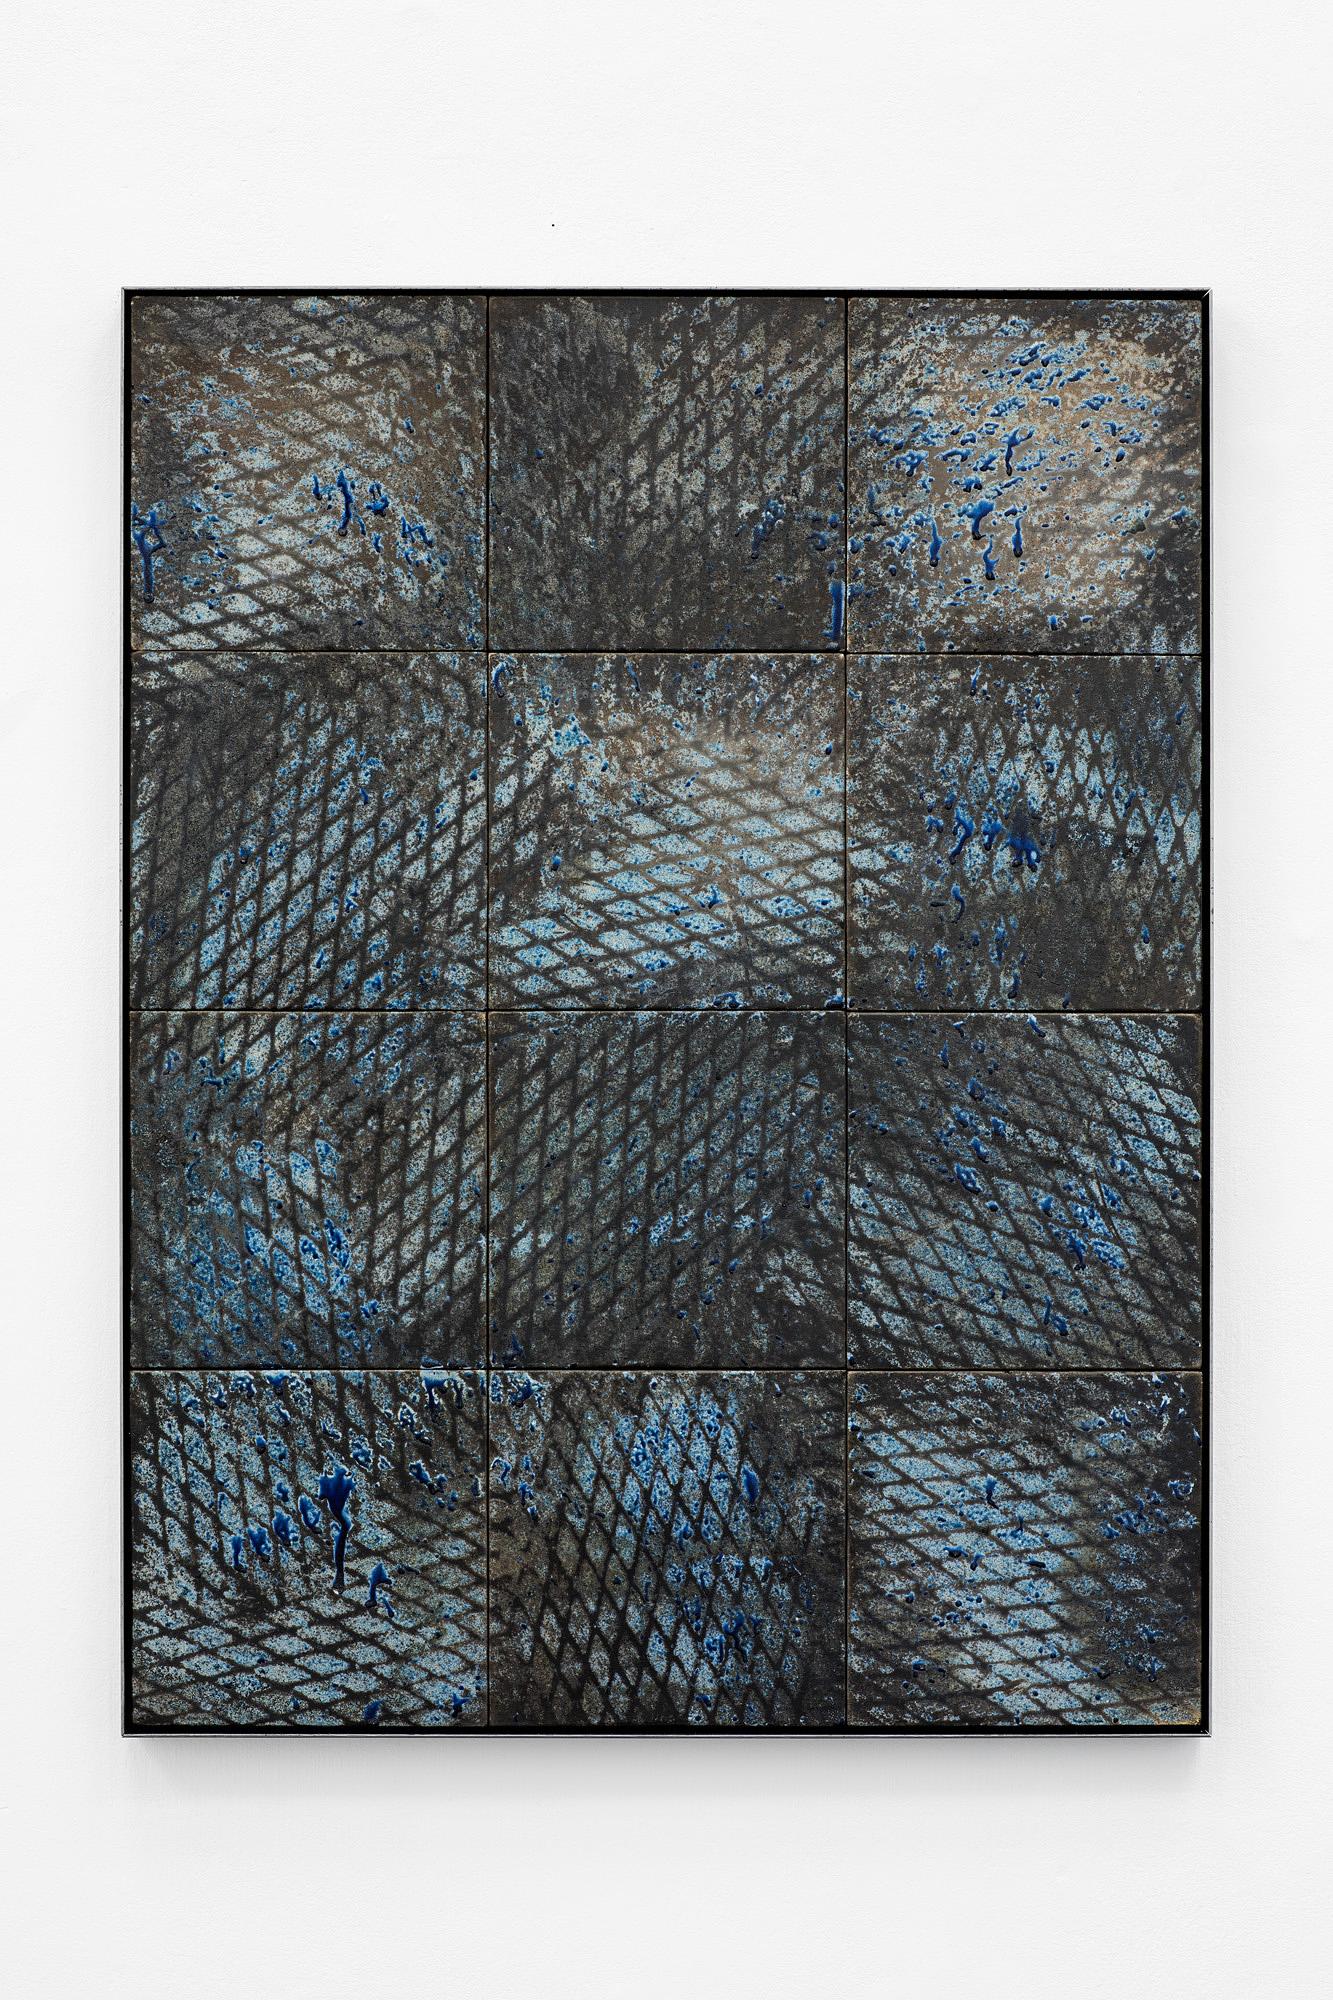 Blue, Expanded Metal Tile, 2019
From the series Expanded Metal Tiles
Raku Burned Tiles
Dimensions: 177 H X 88 W cm.
Unique
Mounted on Metal
Unpacked: 50 kg Approx.
Crated: 60 kg Approx.
Hand-signed back by the artist.

Expanded Metal Tile Pigment